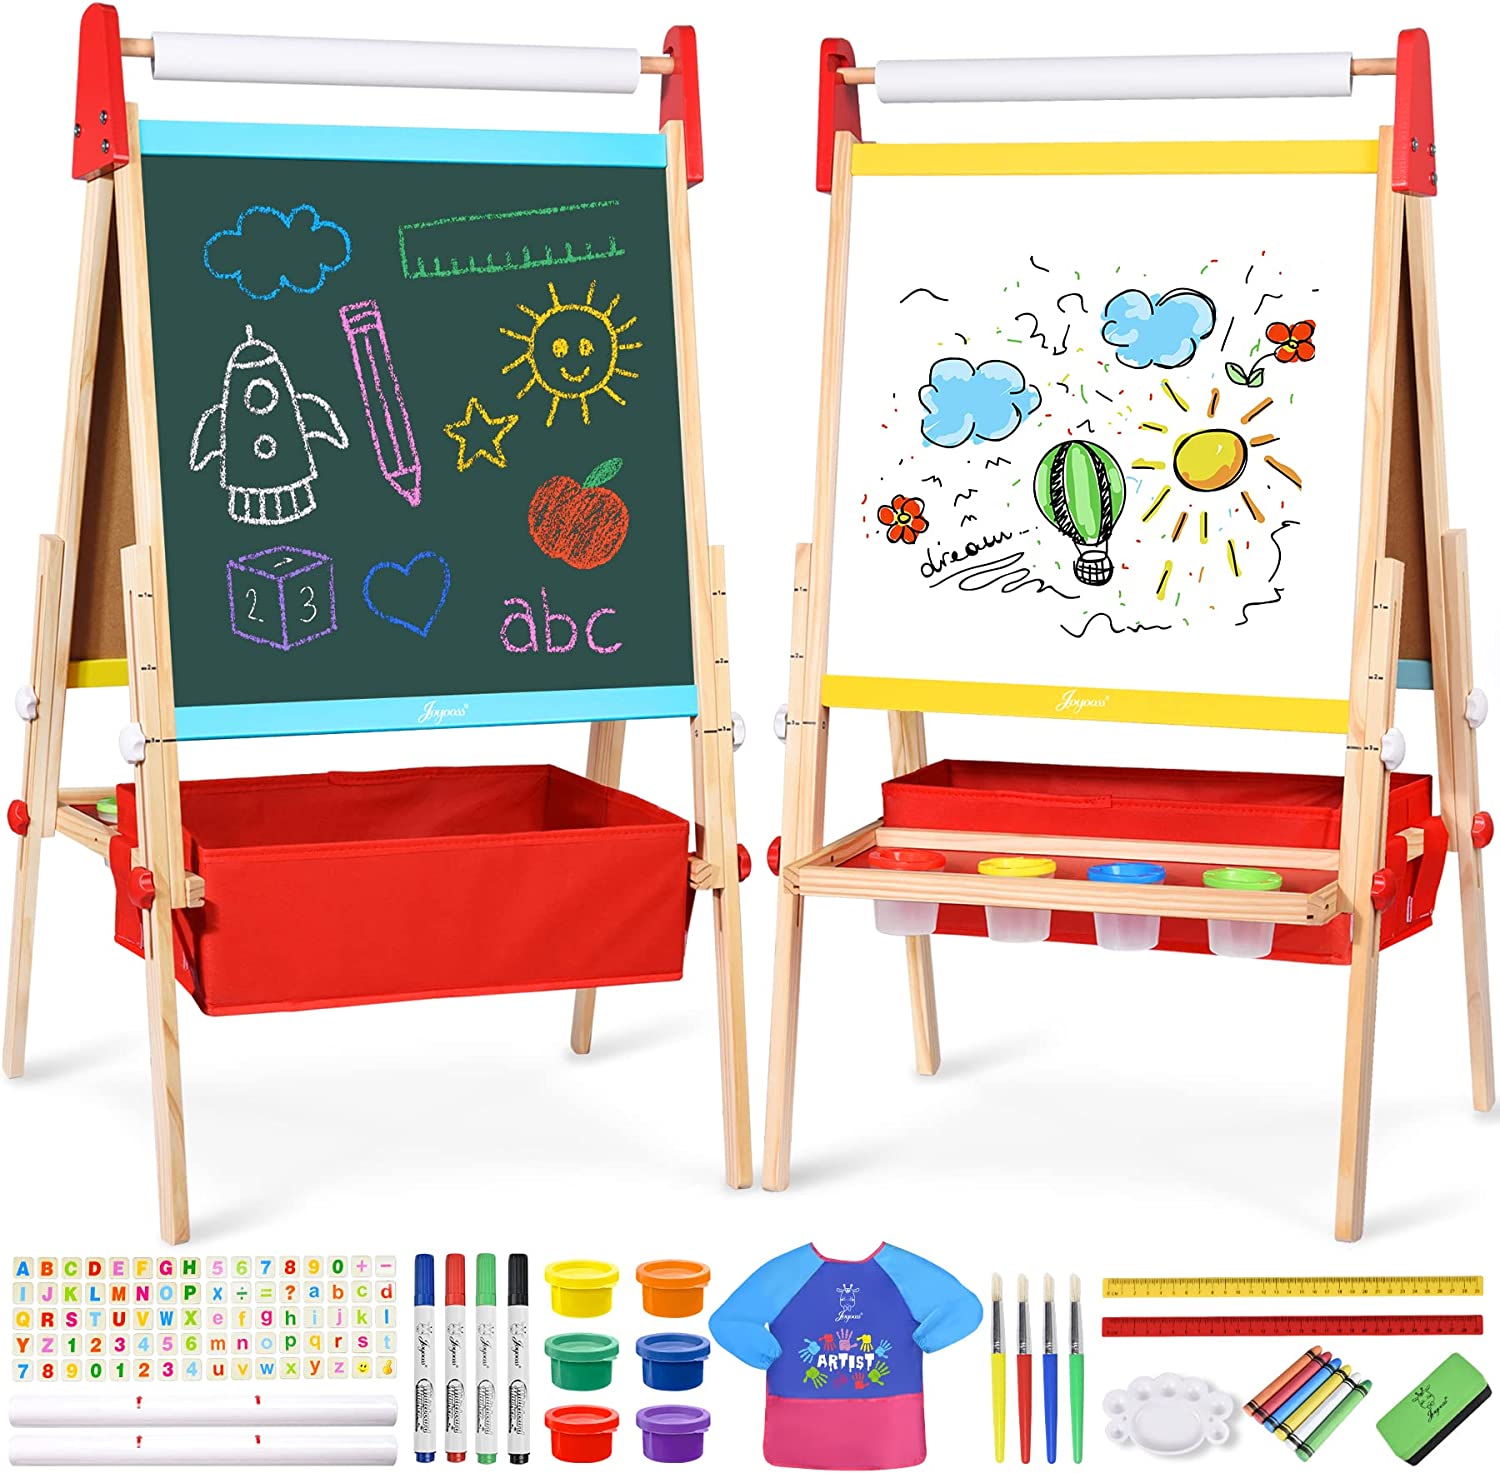 Joyooss Deluxe Art Easel for Kids with 2 Paper Rolls, 6 Finger Paints & Painting Supplies Accessories, Double Sided Magnetic Kids Easel , Height Adjustable Chalkboard & Whiteboard Children Easel